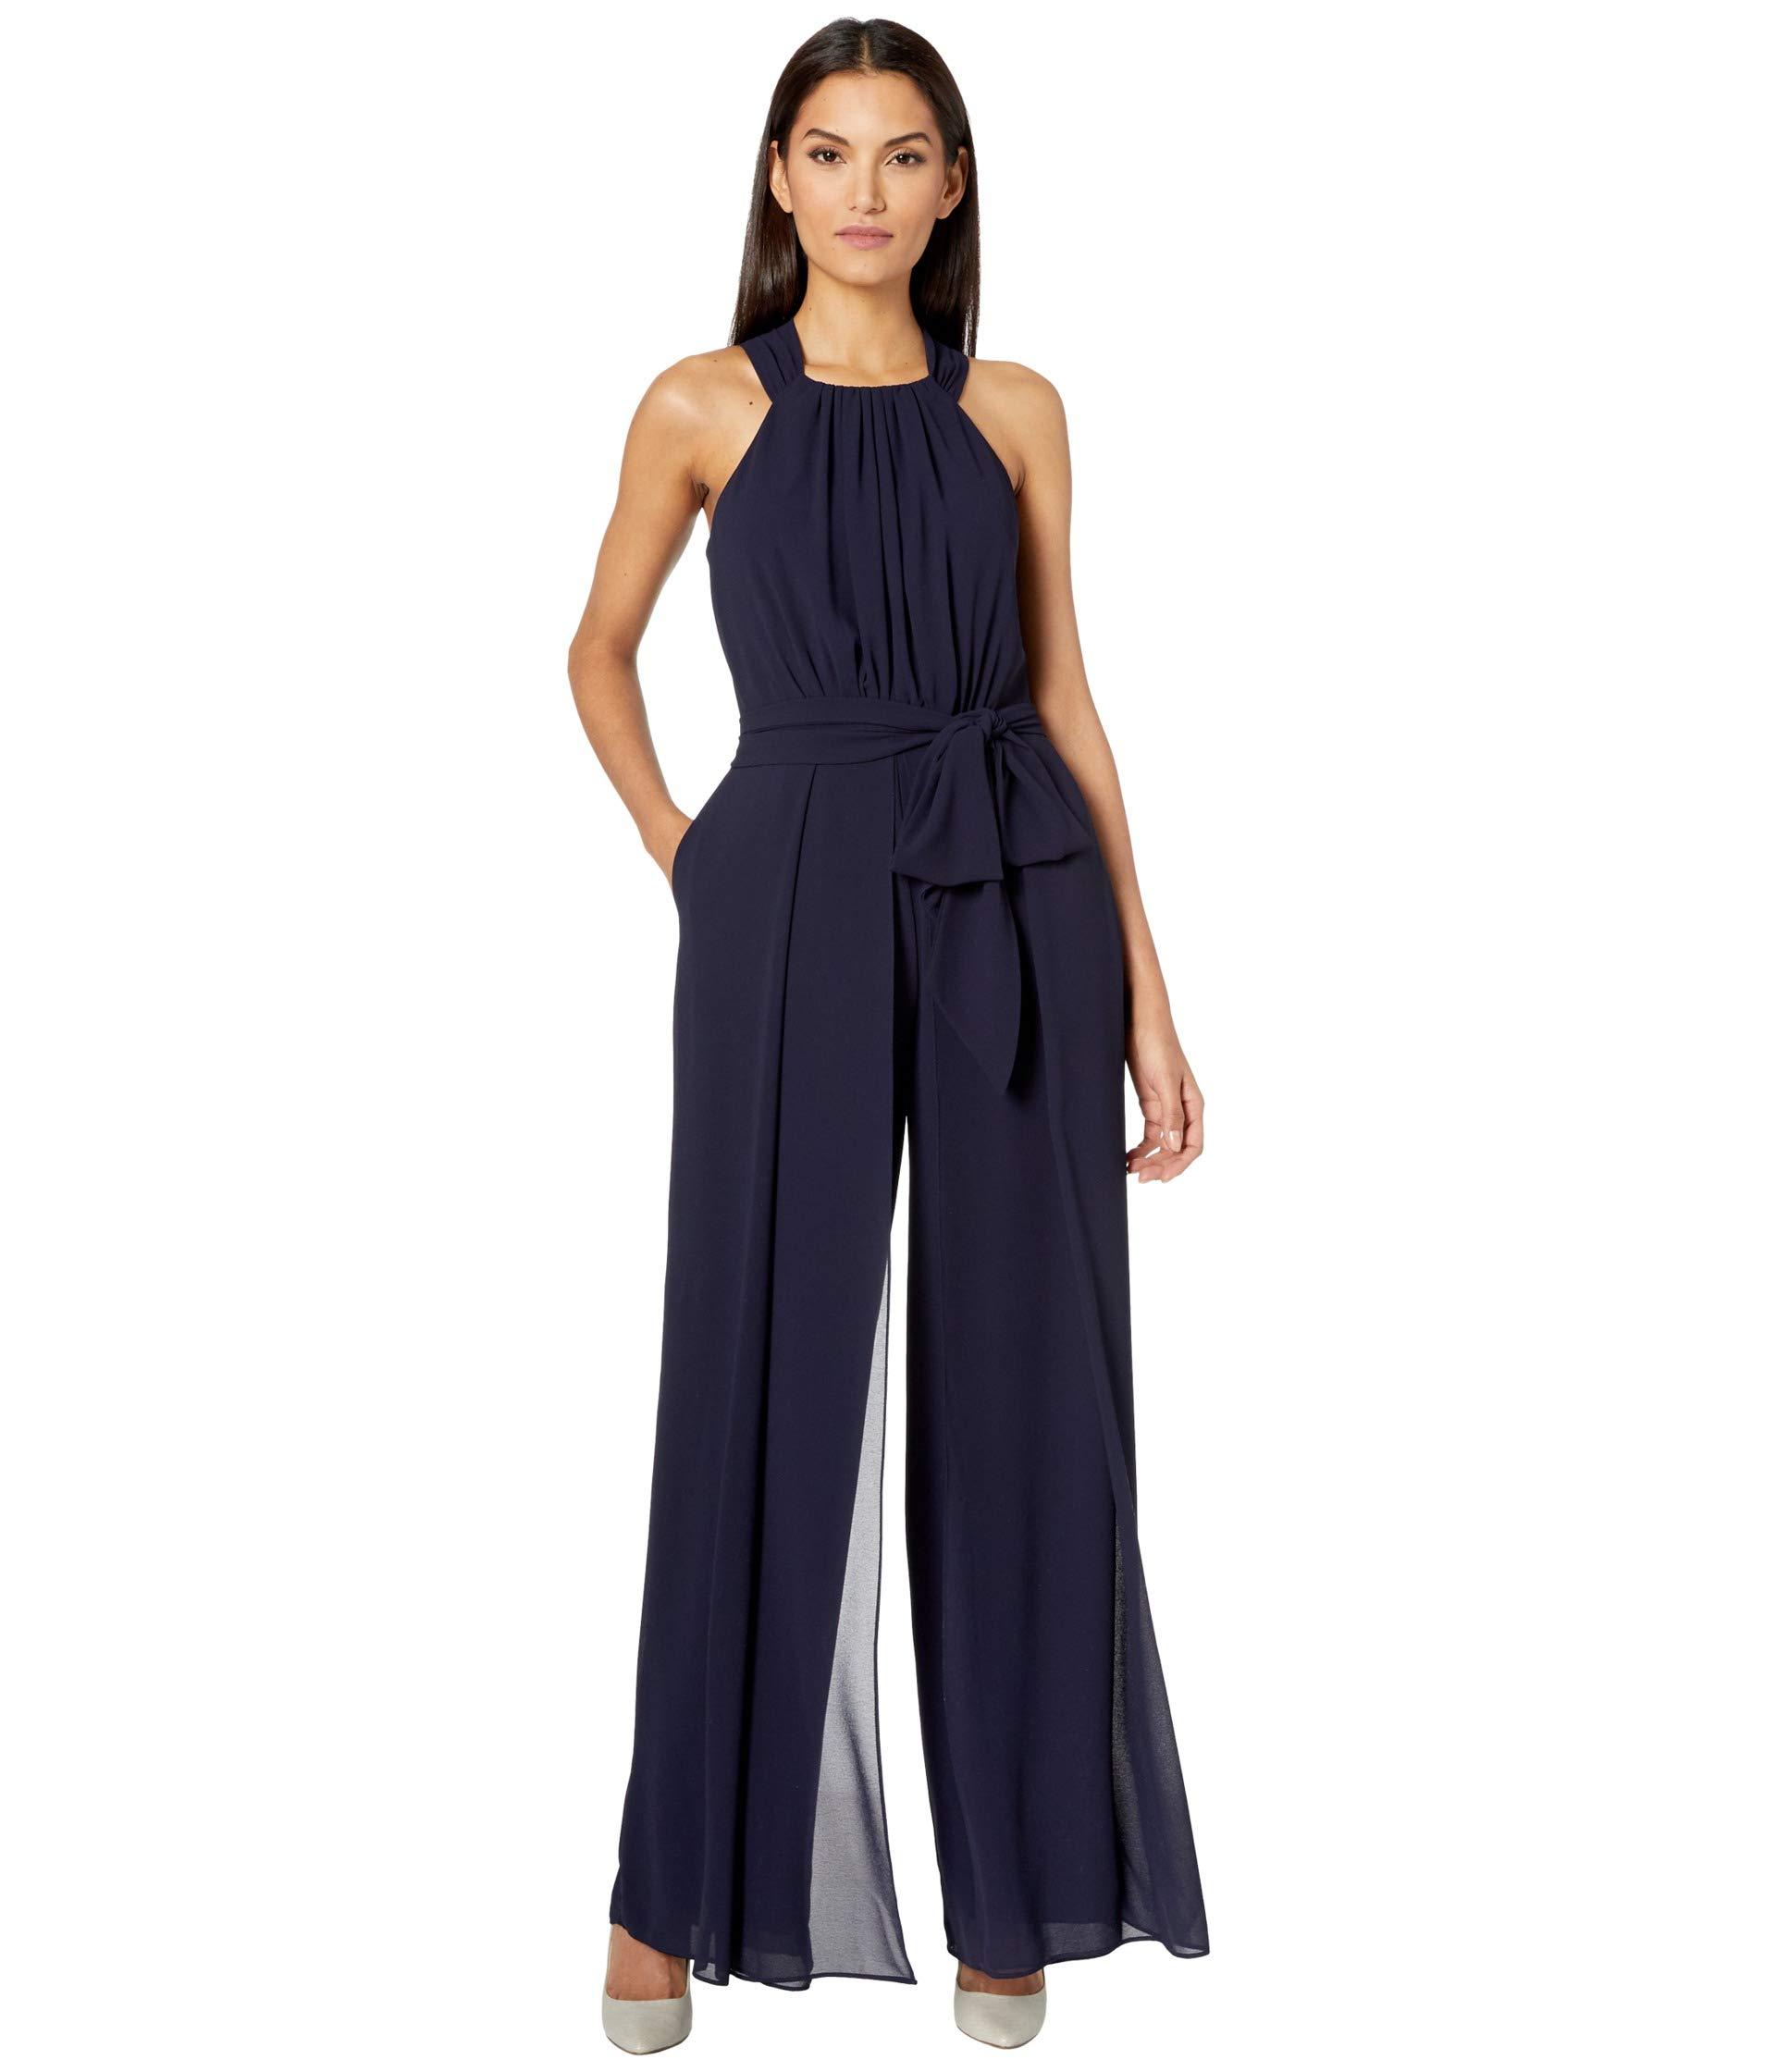 Vince Camuto Chiffon Halter Jumpsuit With Tie Waist in Navy (Blue) - Lyst